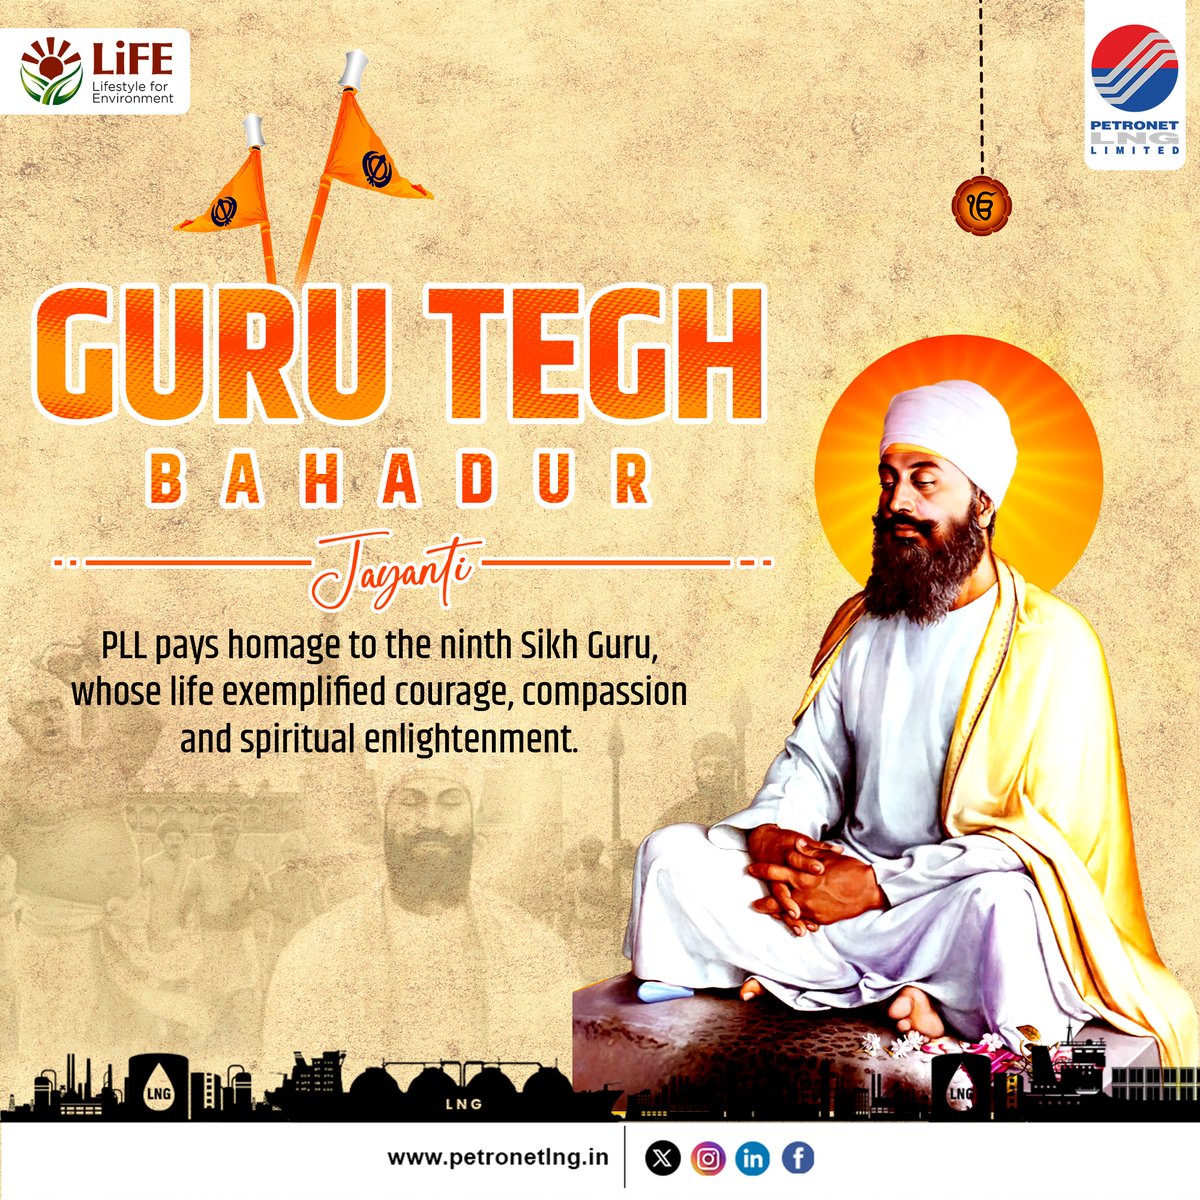 PLL pays homage to the revered Guru Teg Bahadur ji on his Prakash Parv today. His teachings of compassion, tolerance and righteousness are an inspiration to all. Let us imbibe his noble virtues and strive for a world filled with peace and harmony. #GuruTegBahadurJayanti